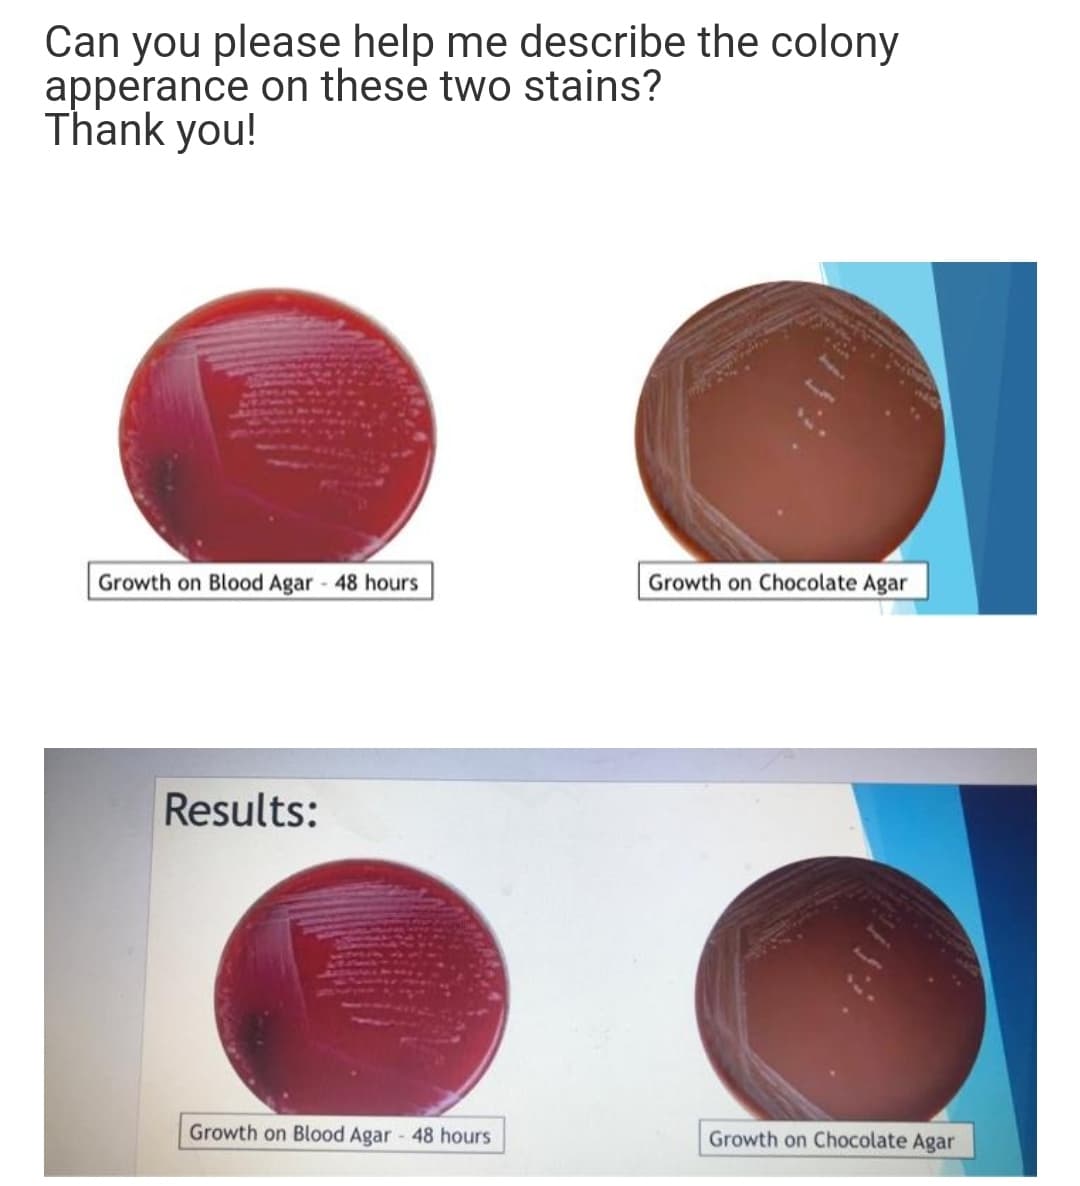 Can you please help me describe the colony
apperance on these two stains?
Thank you!
Growth on Blood Agar - 48 hours
Growth on Chocolate Agar
Results:
Growth on Blood Agar 48 hours
Growth on Chocolate Agar
